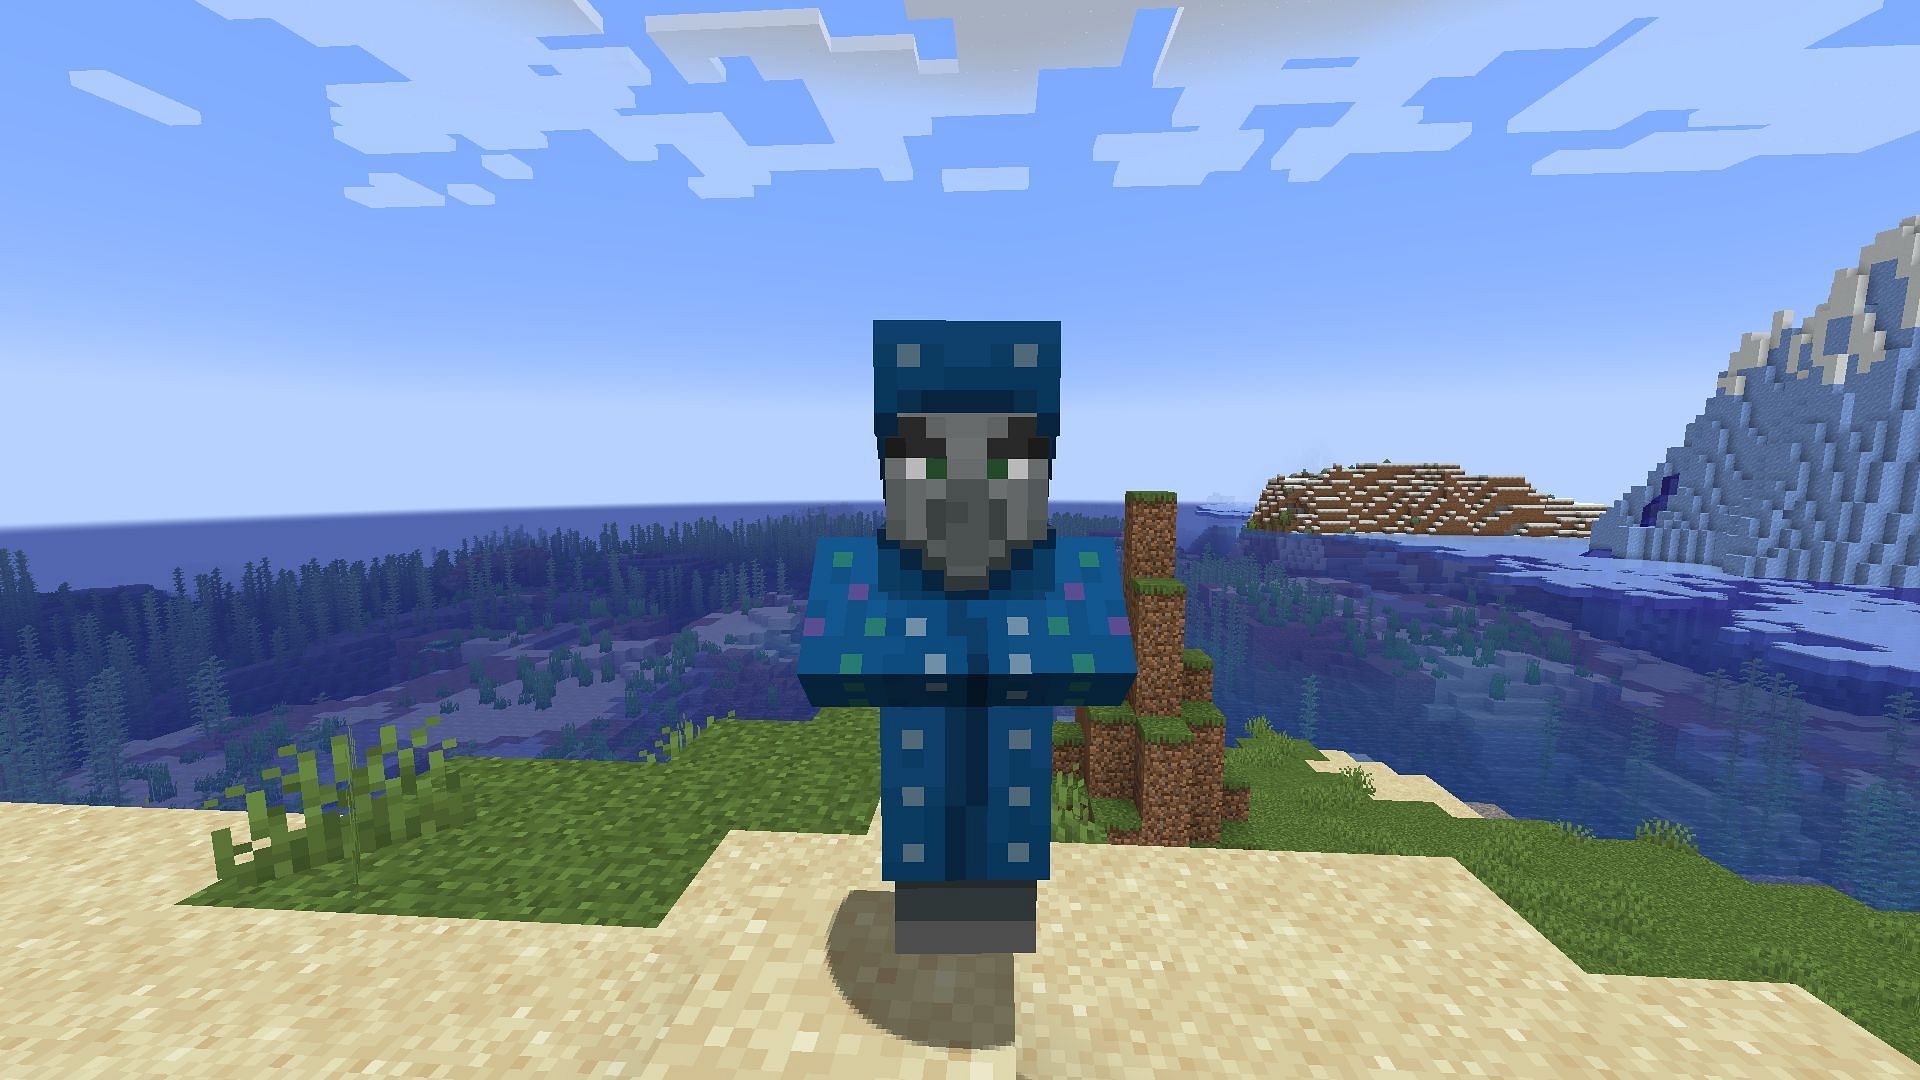 Many players would not know about Illusioner since they do not spawn in Minecraft Java Edition (Image via Mojang)